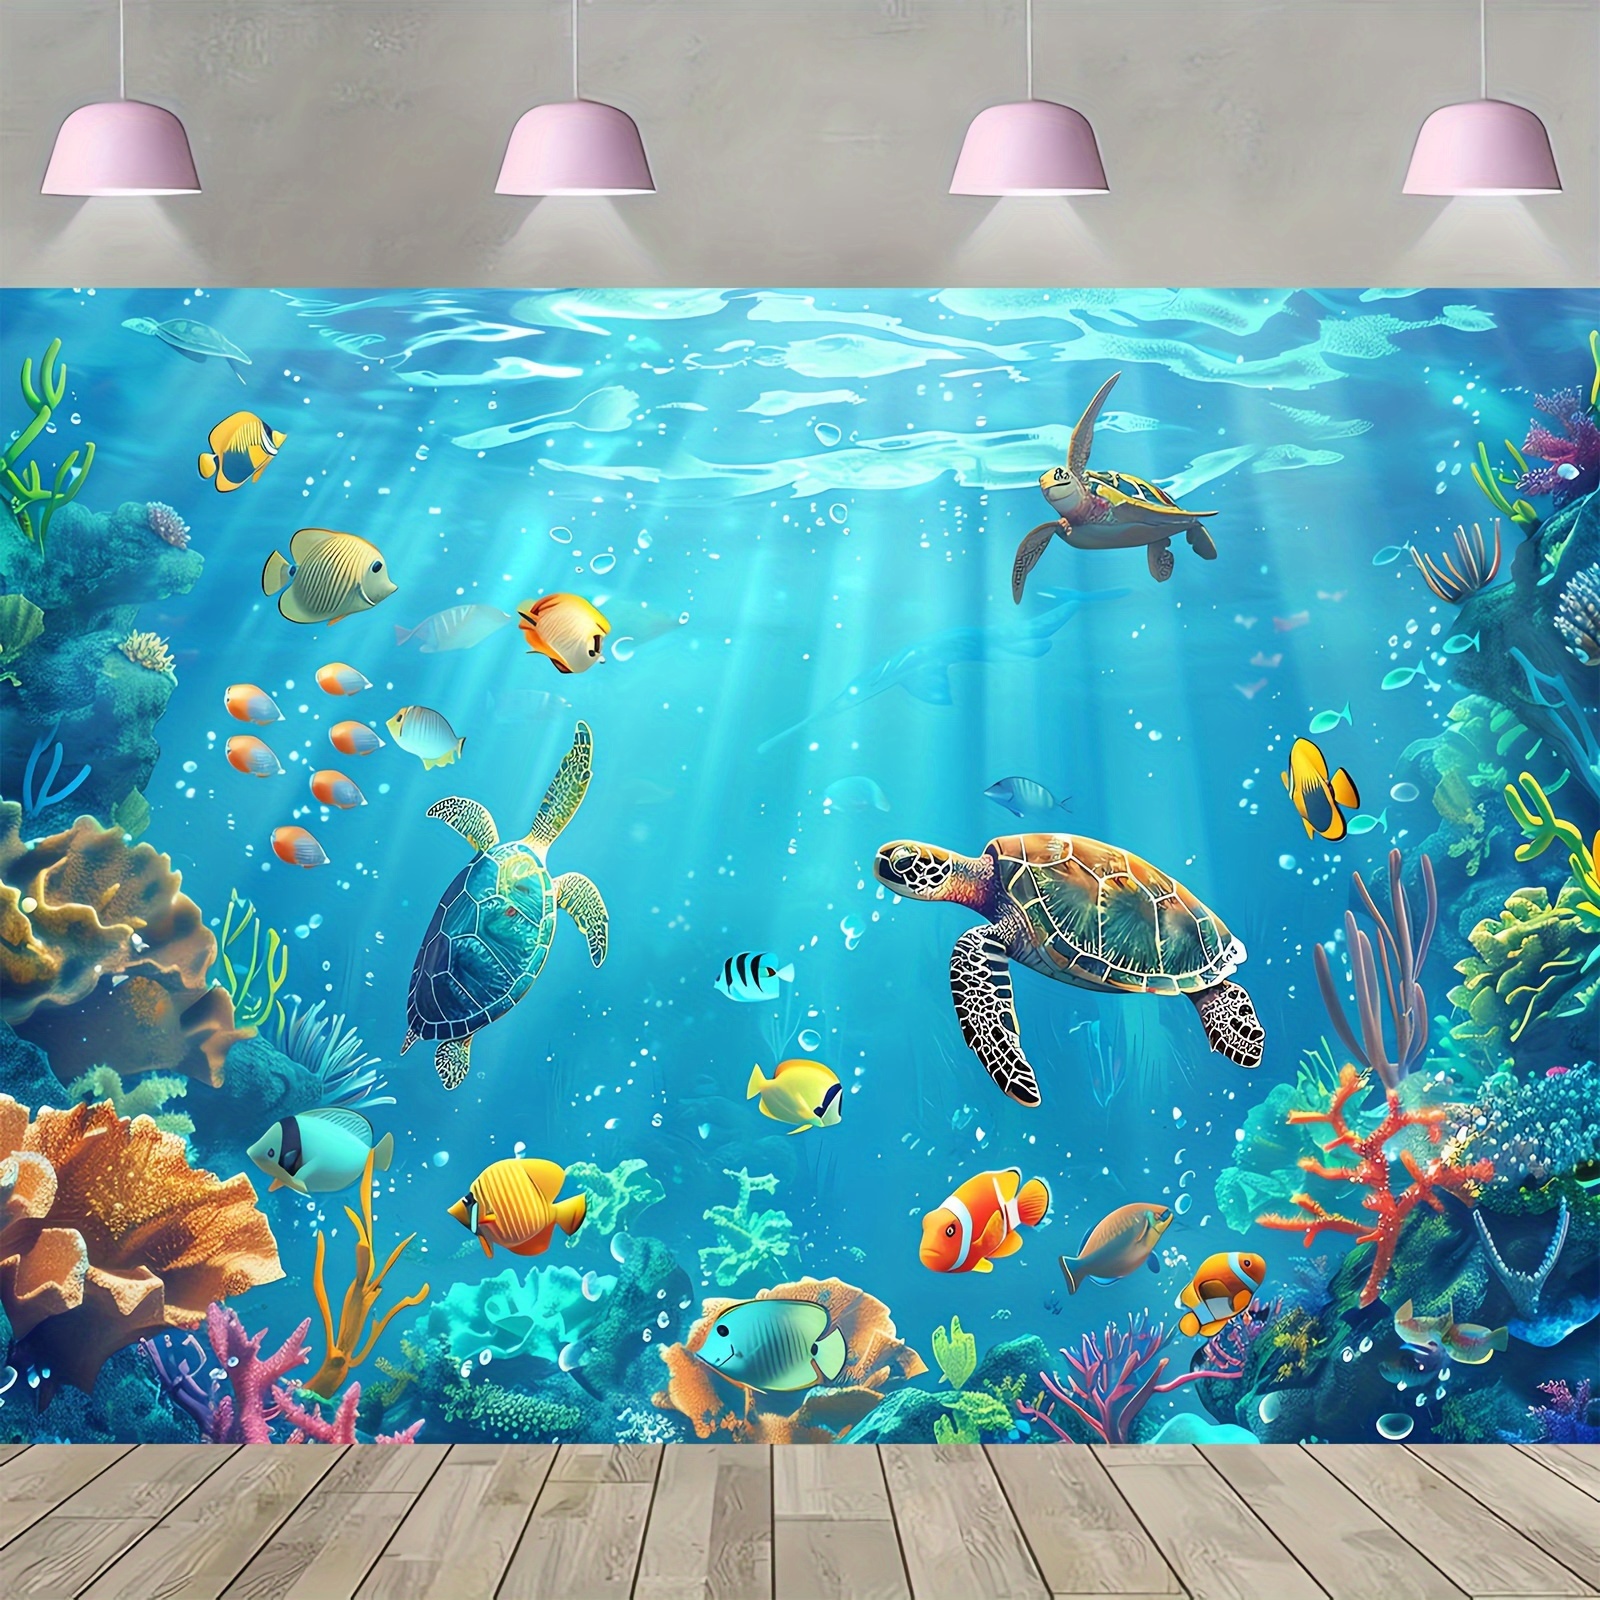 

Under The Sea Party Backdrop - Versatile Polyester Underwater With Fish & Seabed Design For Birthday, Shower Decorations & Photo Booth Props